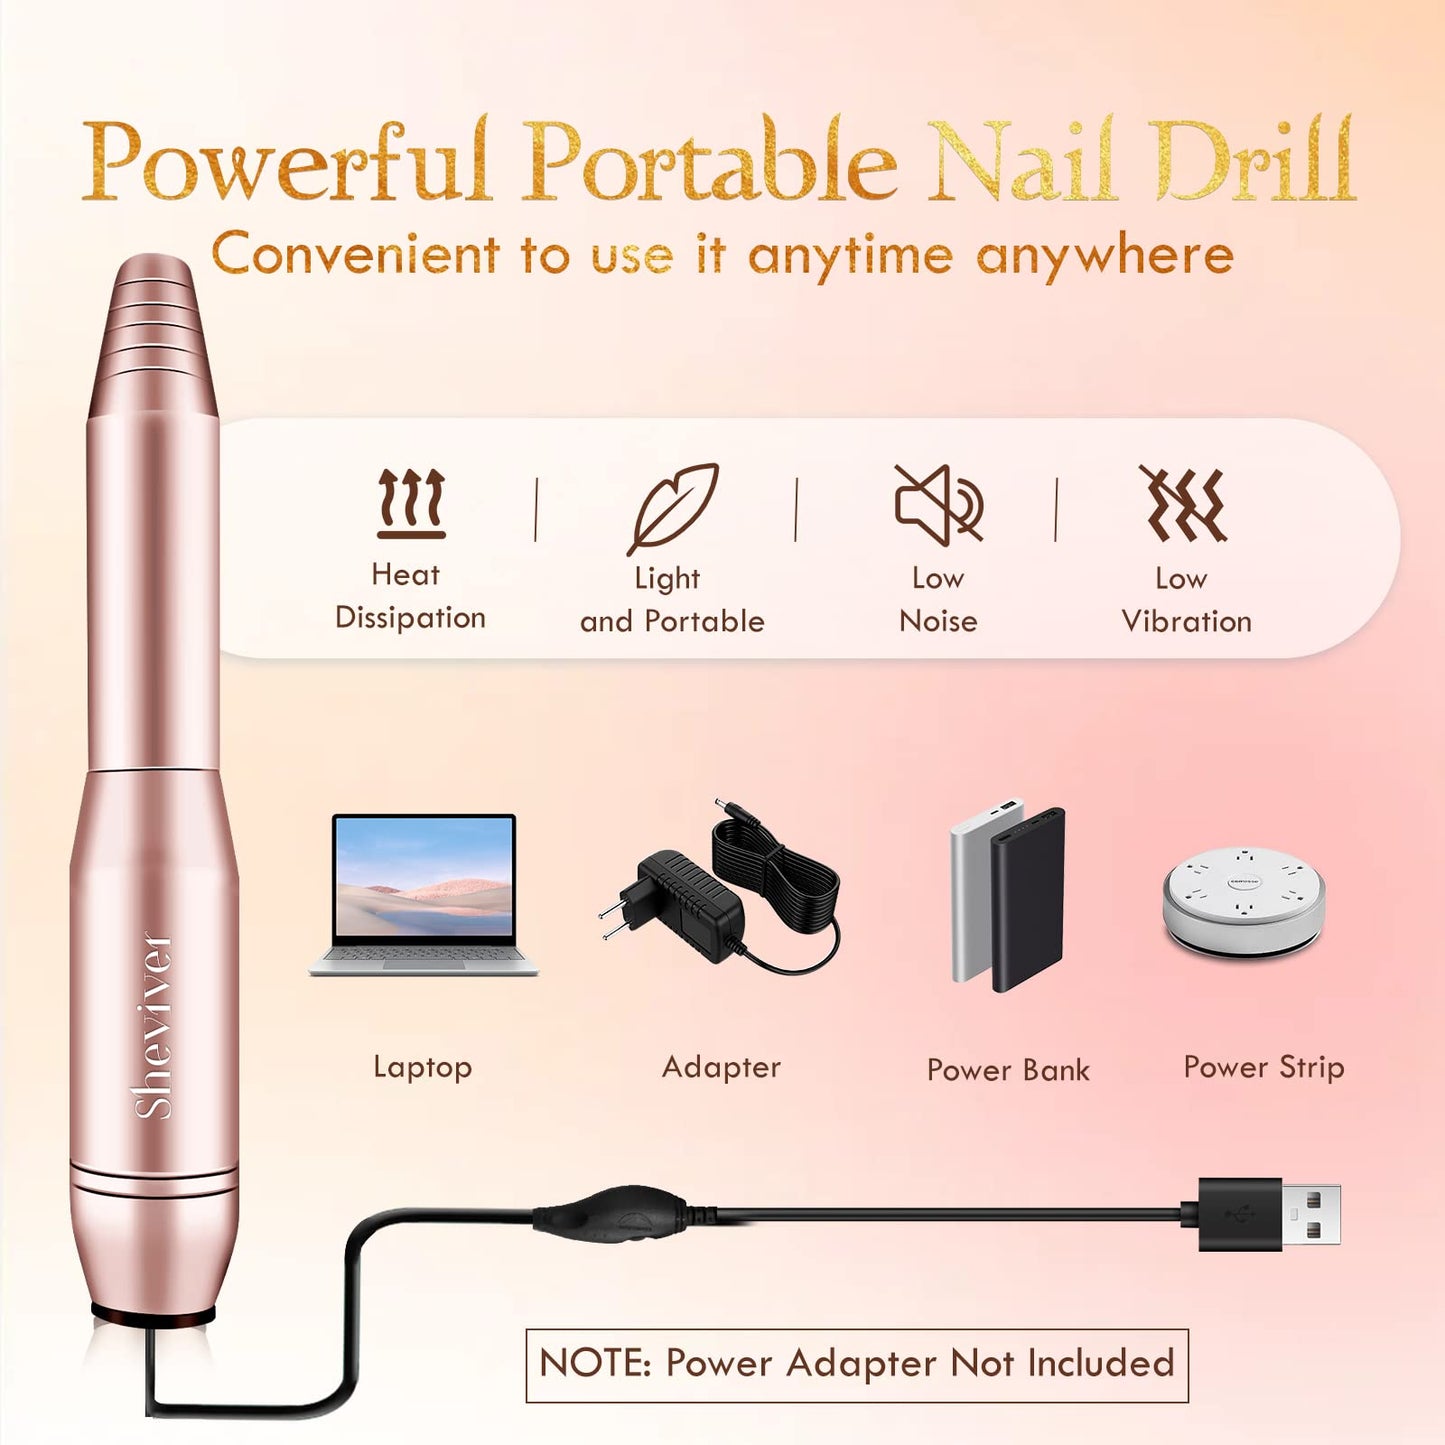 Sheviver Electric Nail Drill, Electric Nail File for Acrylic Gel Nails, Professional Nail Drill Machine Efile Manicure Pedicure Tools with Gold Nail Drill Bits for Home Salon Use